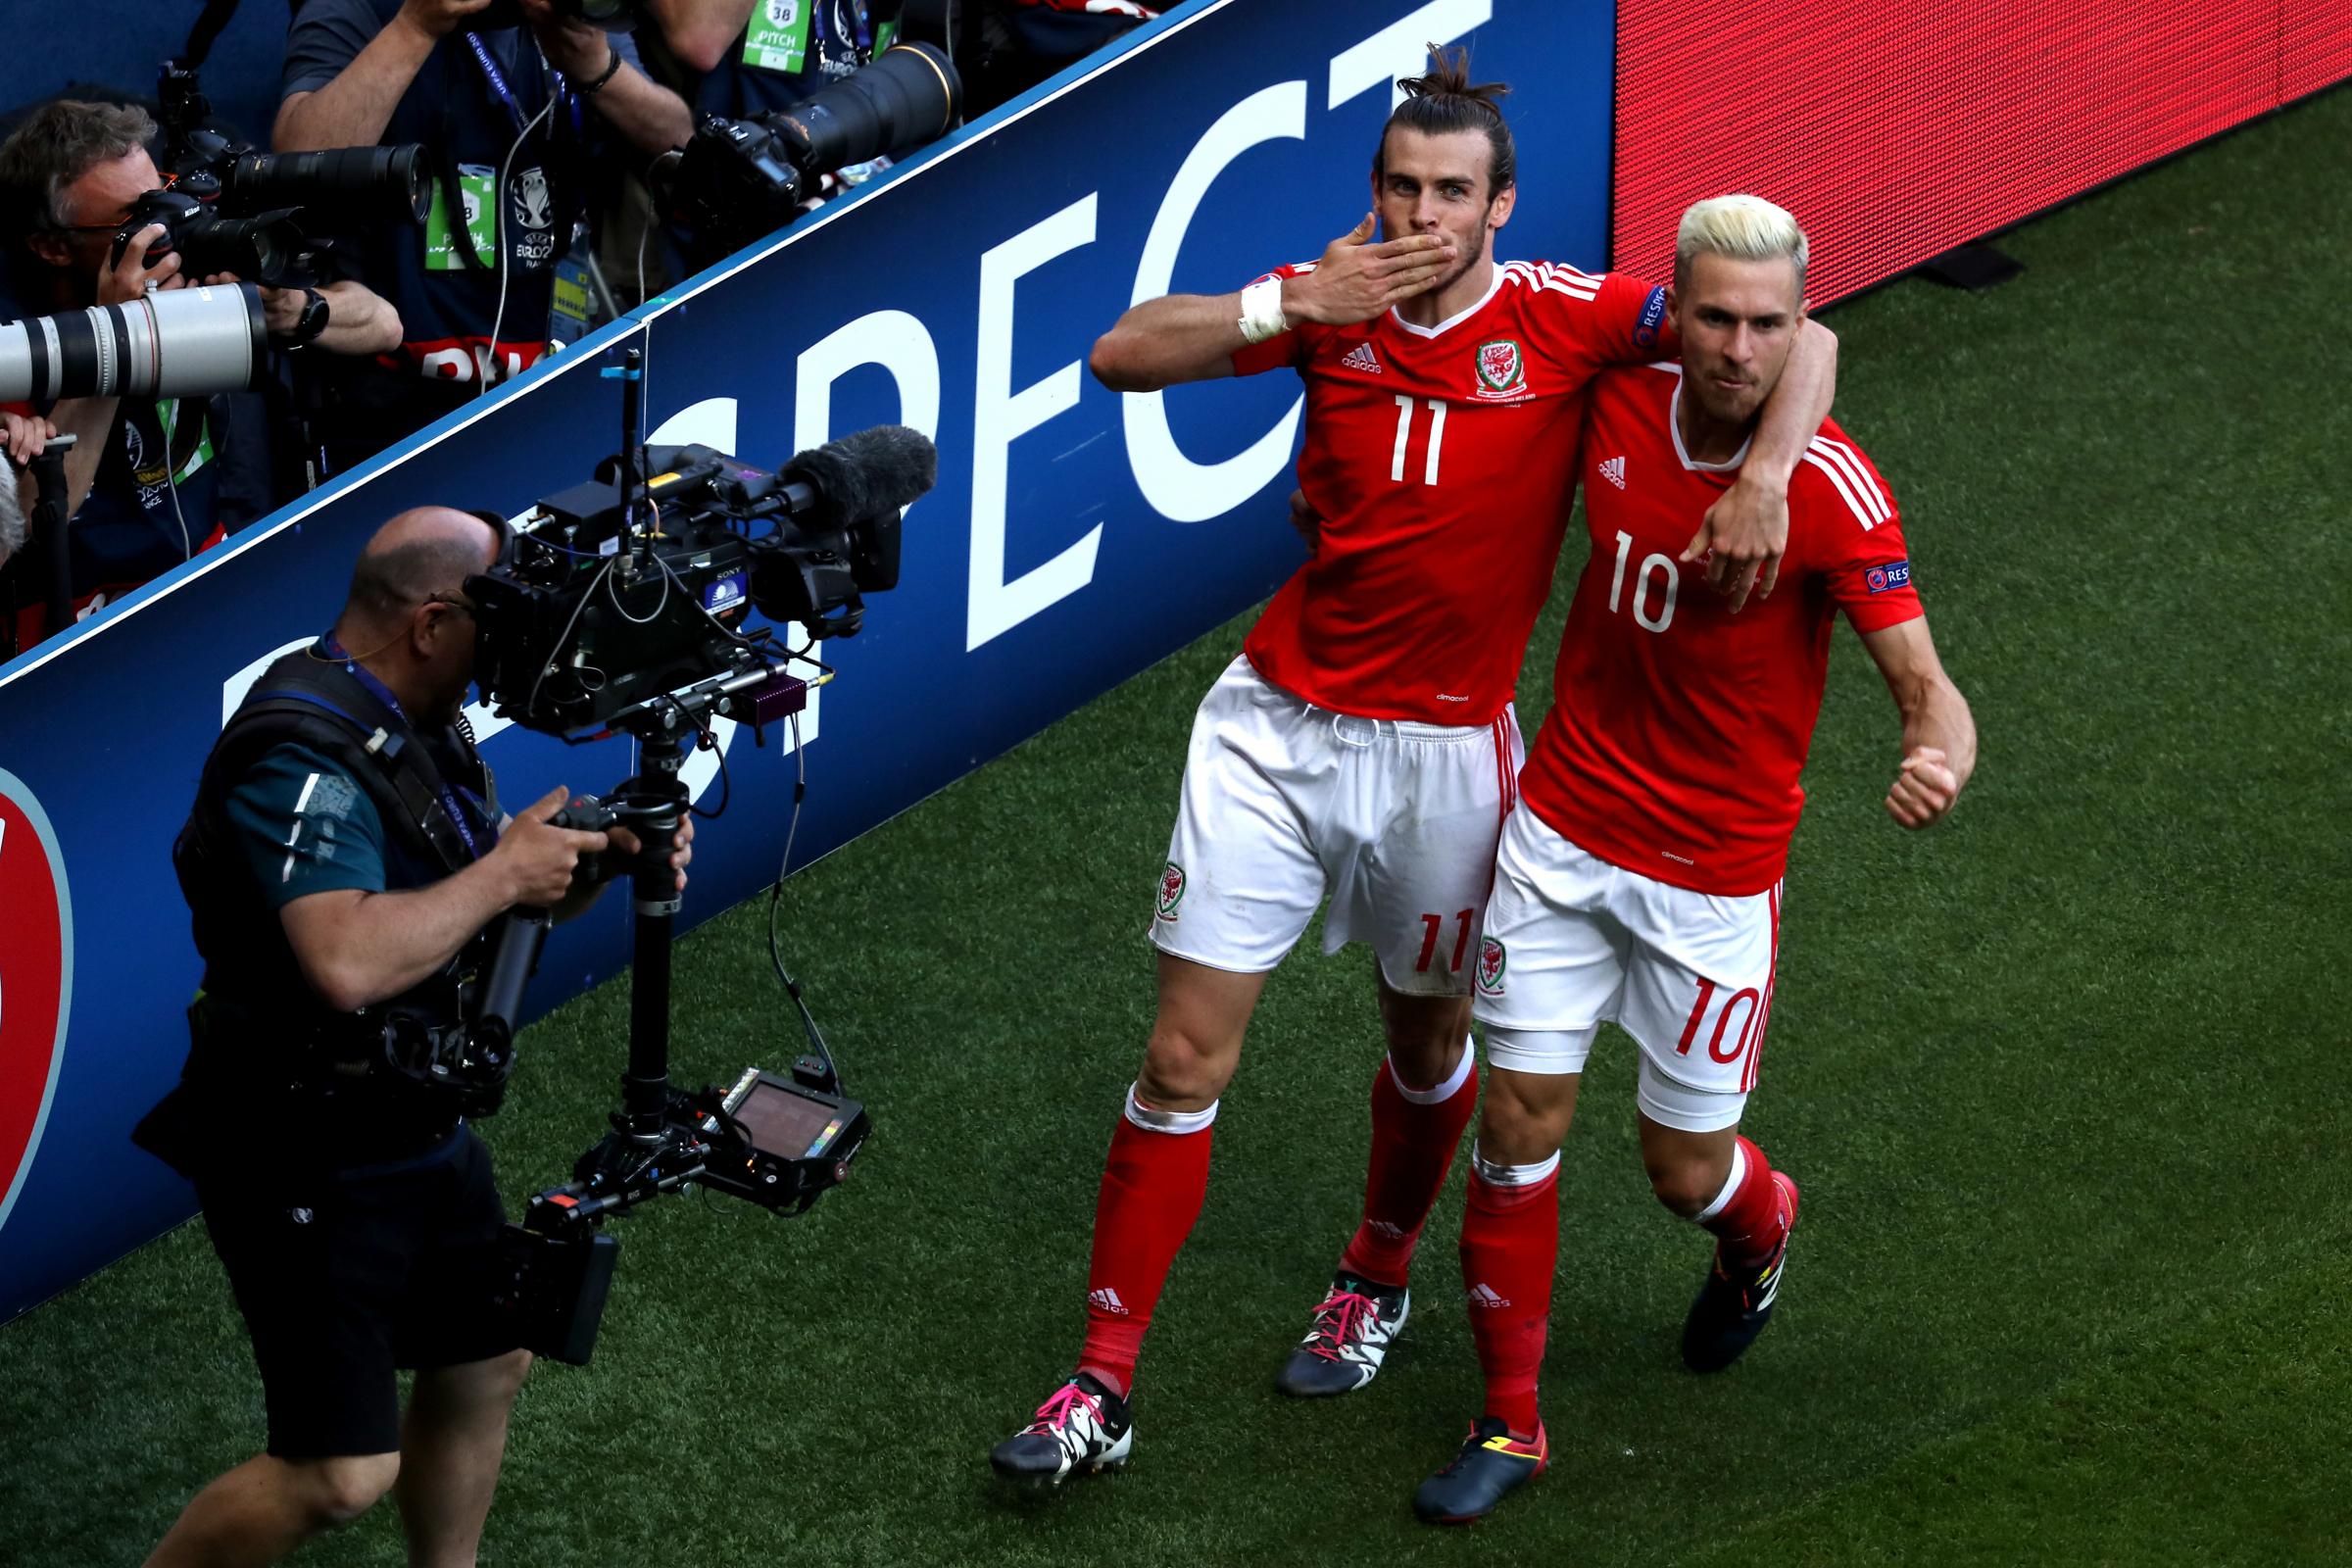 Gareth Bale (left) celebrates with teammate Aaron Ramsey after the goal against Northern Ireland at Euro 2016